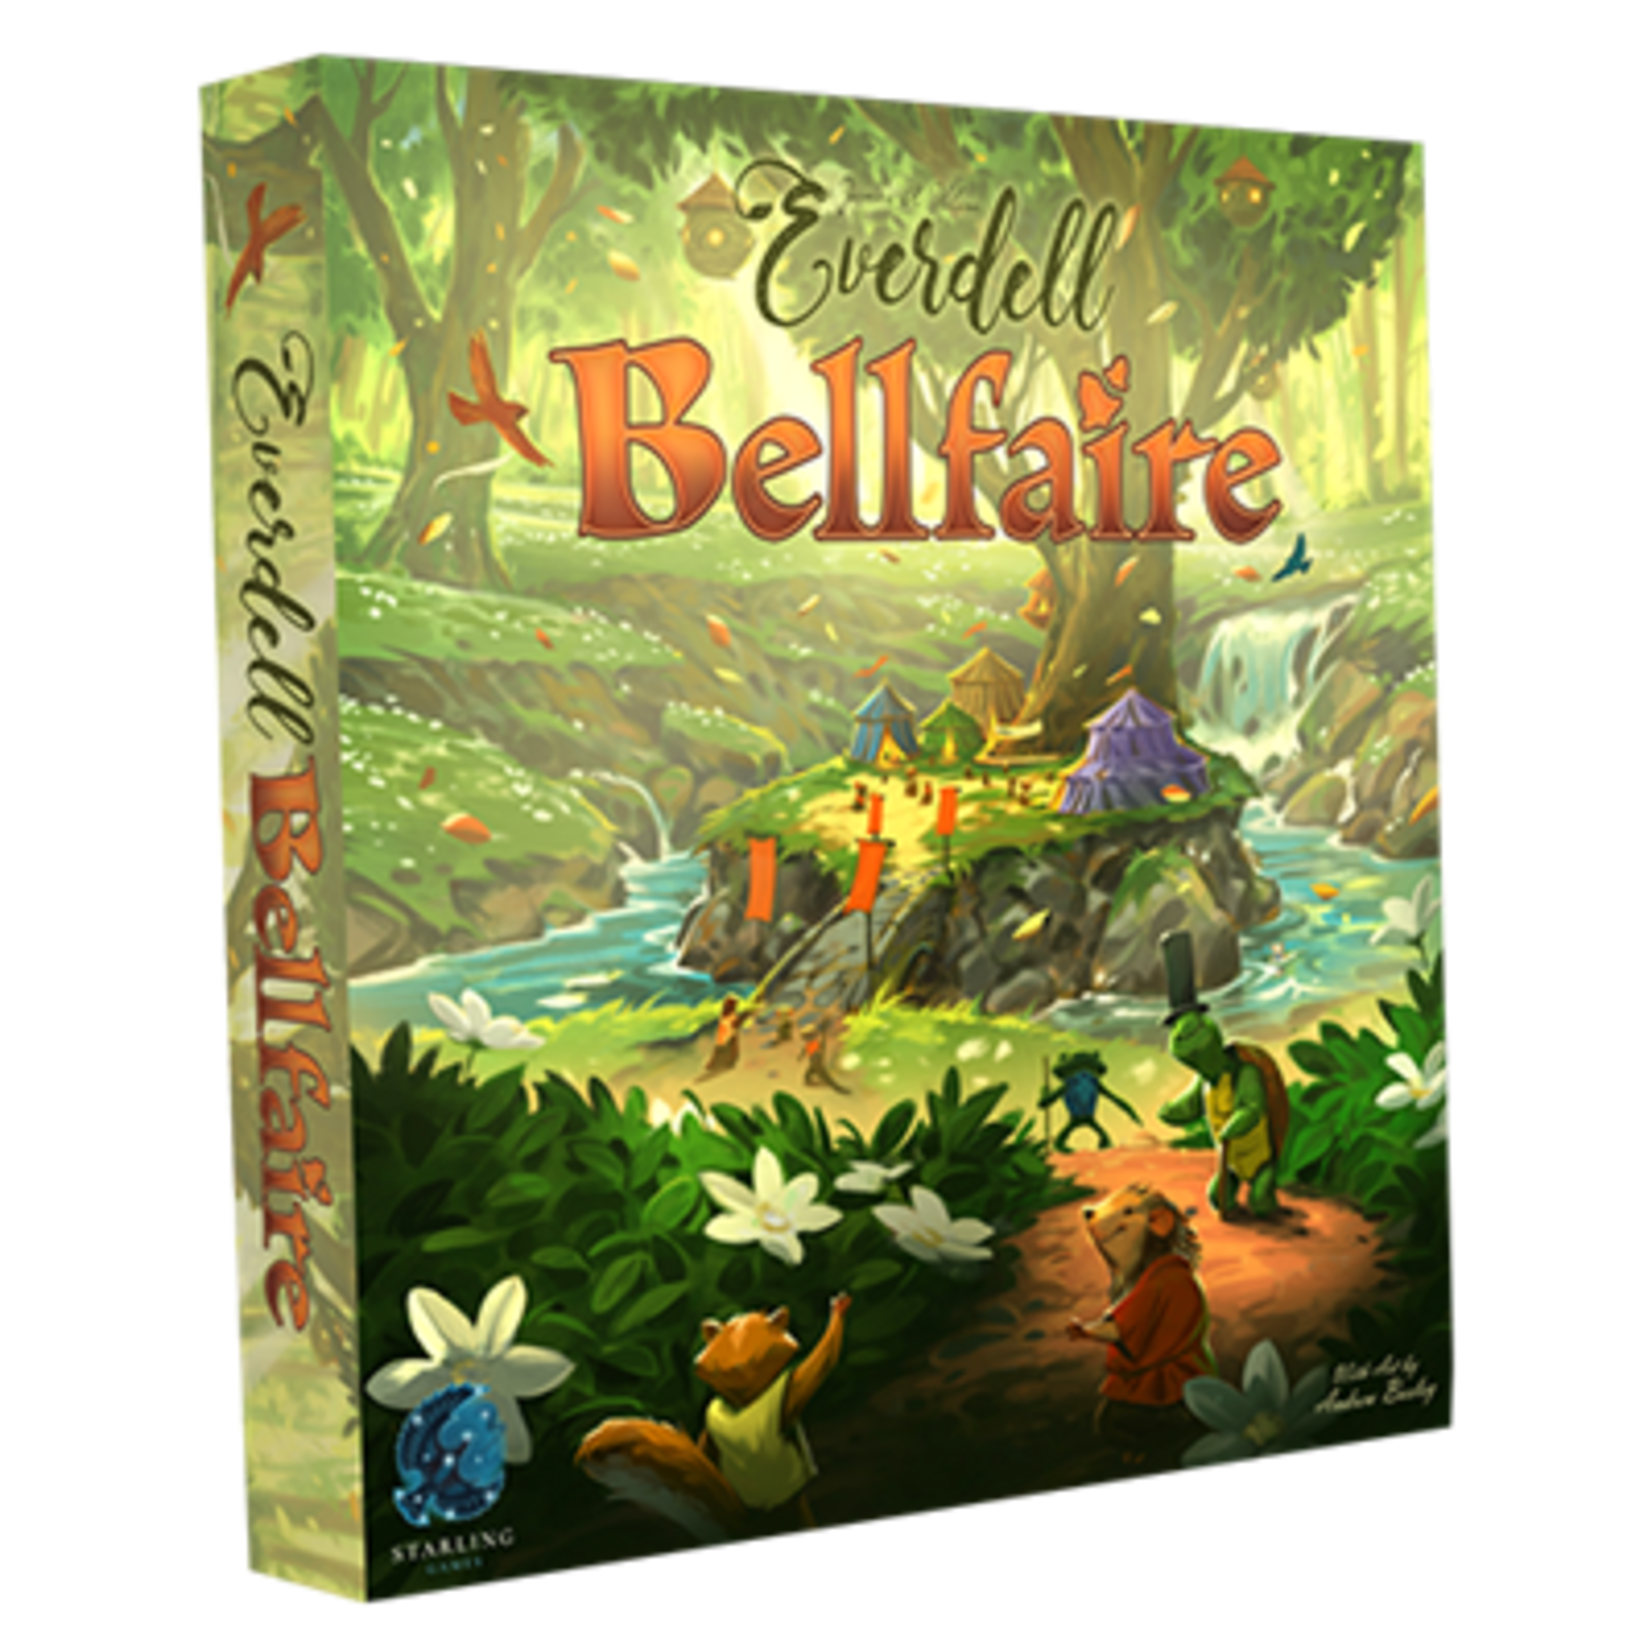 Tabletop Tycoon Everdell - Bellfaire Expansion